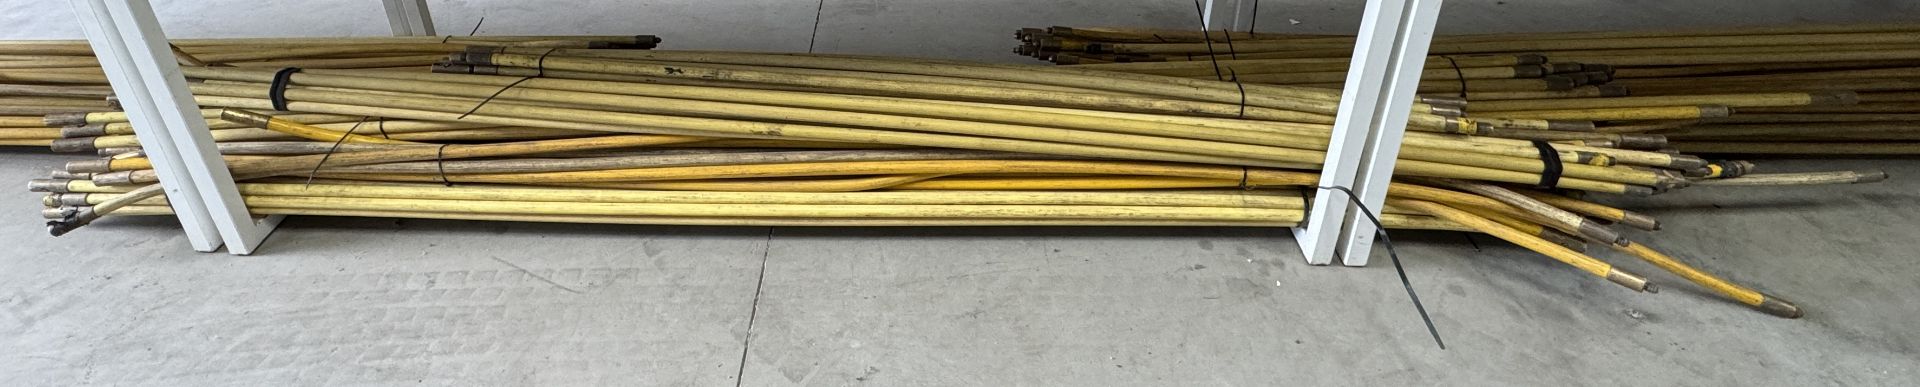 80 Drain Rods, 3m (Location: Brentwood. Please Refer to General Notes)